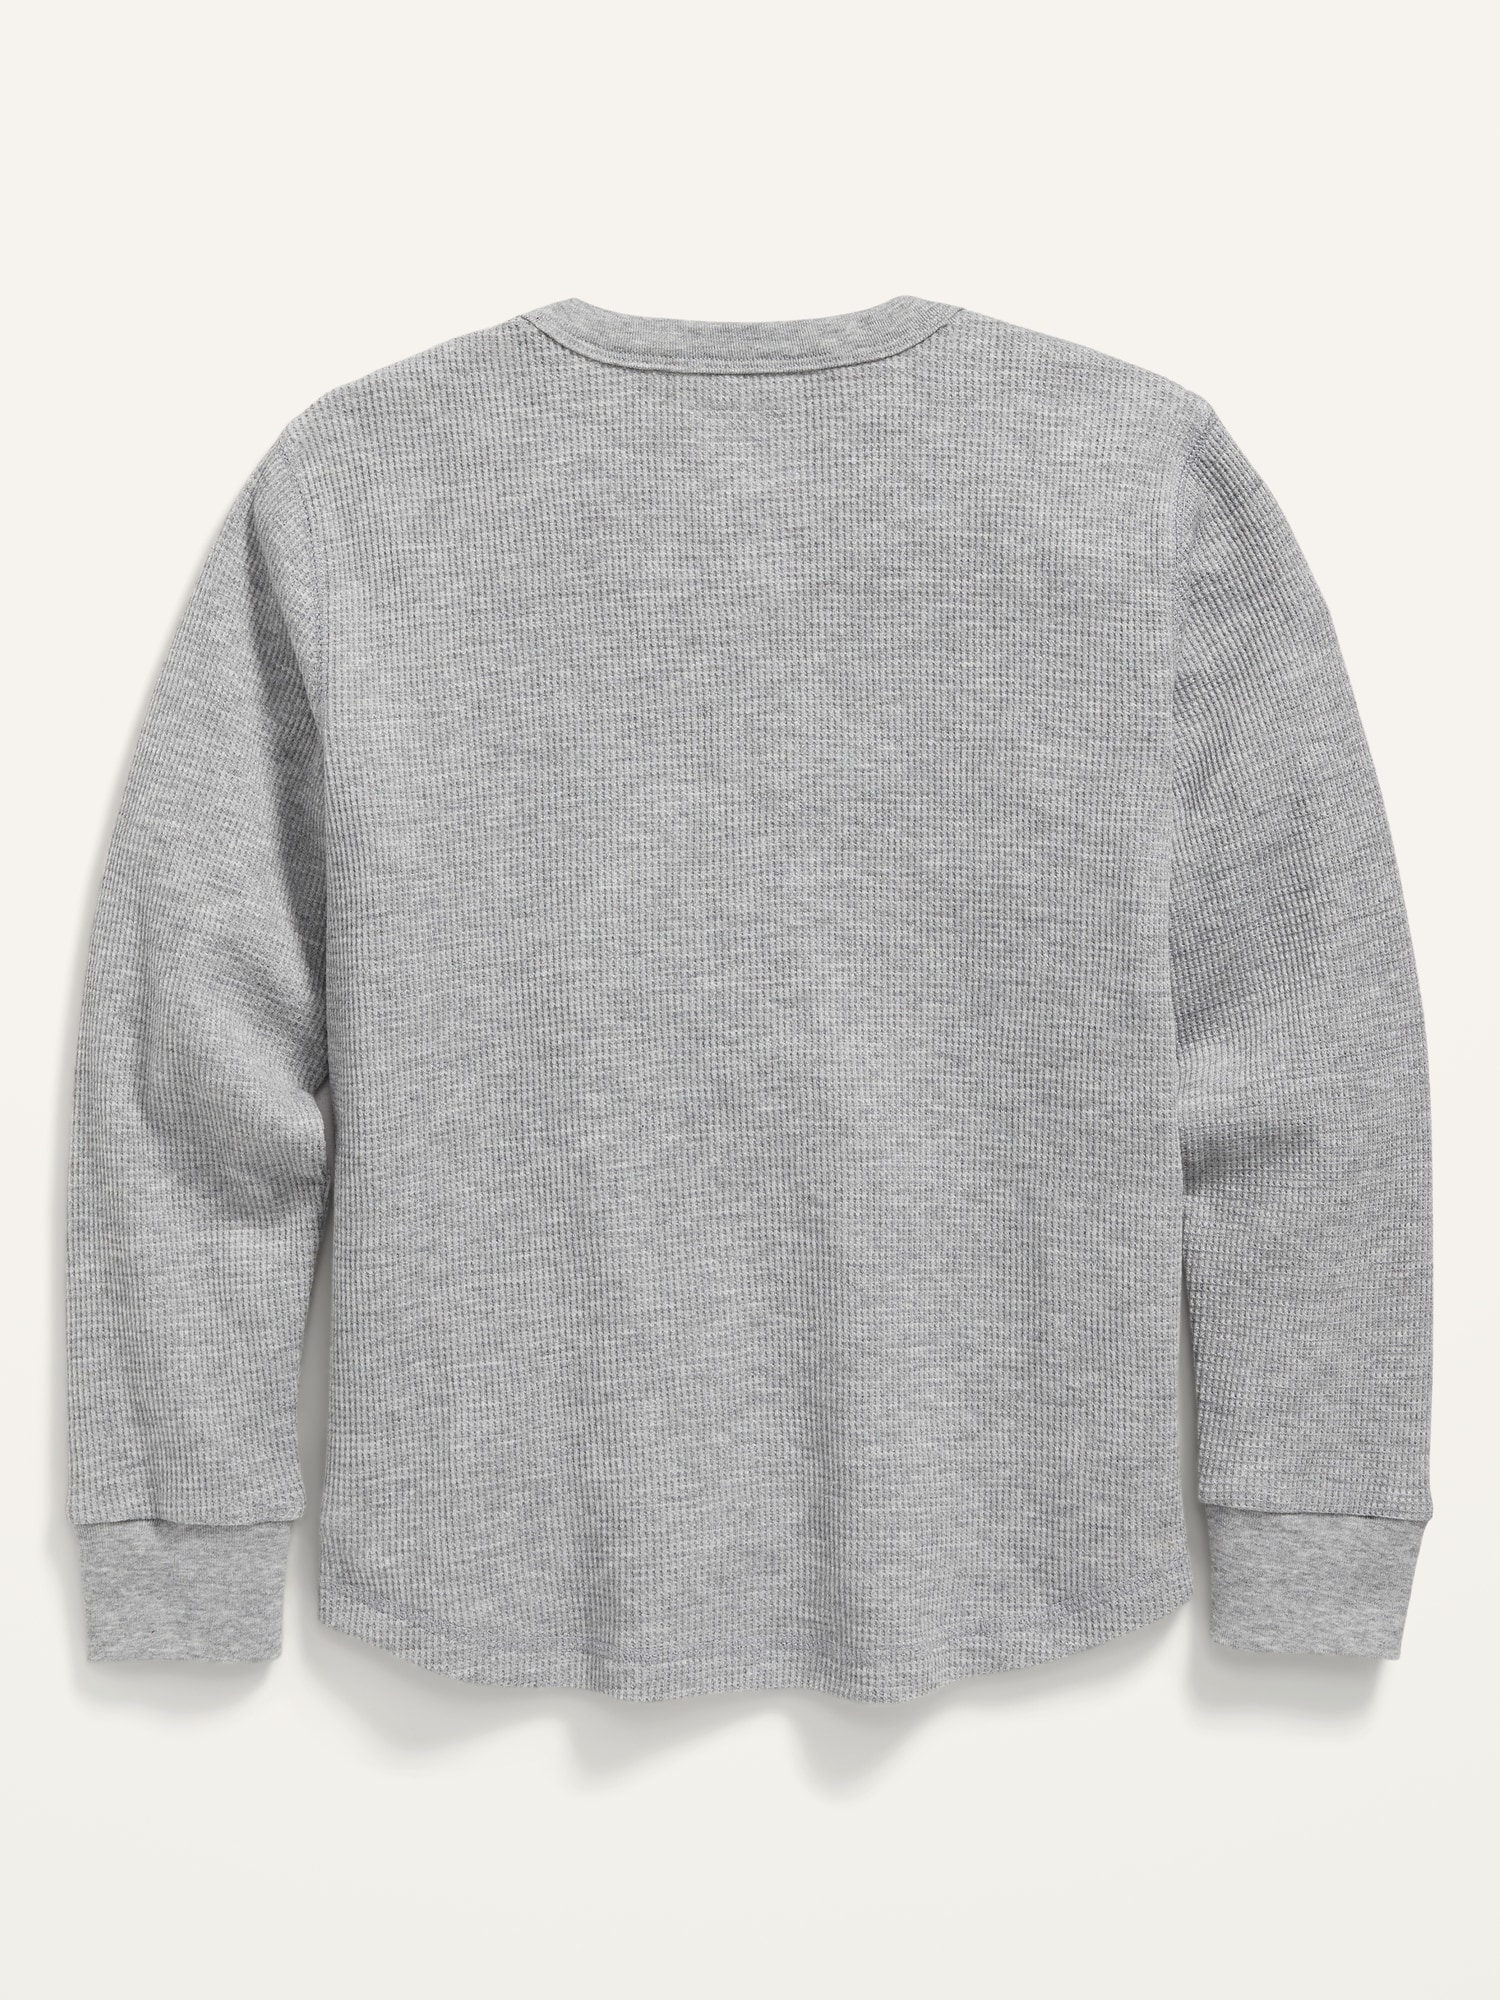 Thermal-Knit Long-Sleeve T-Shirt for Boys | Old Navy